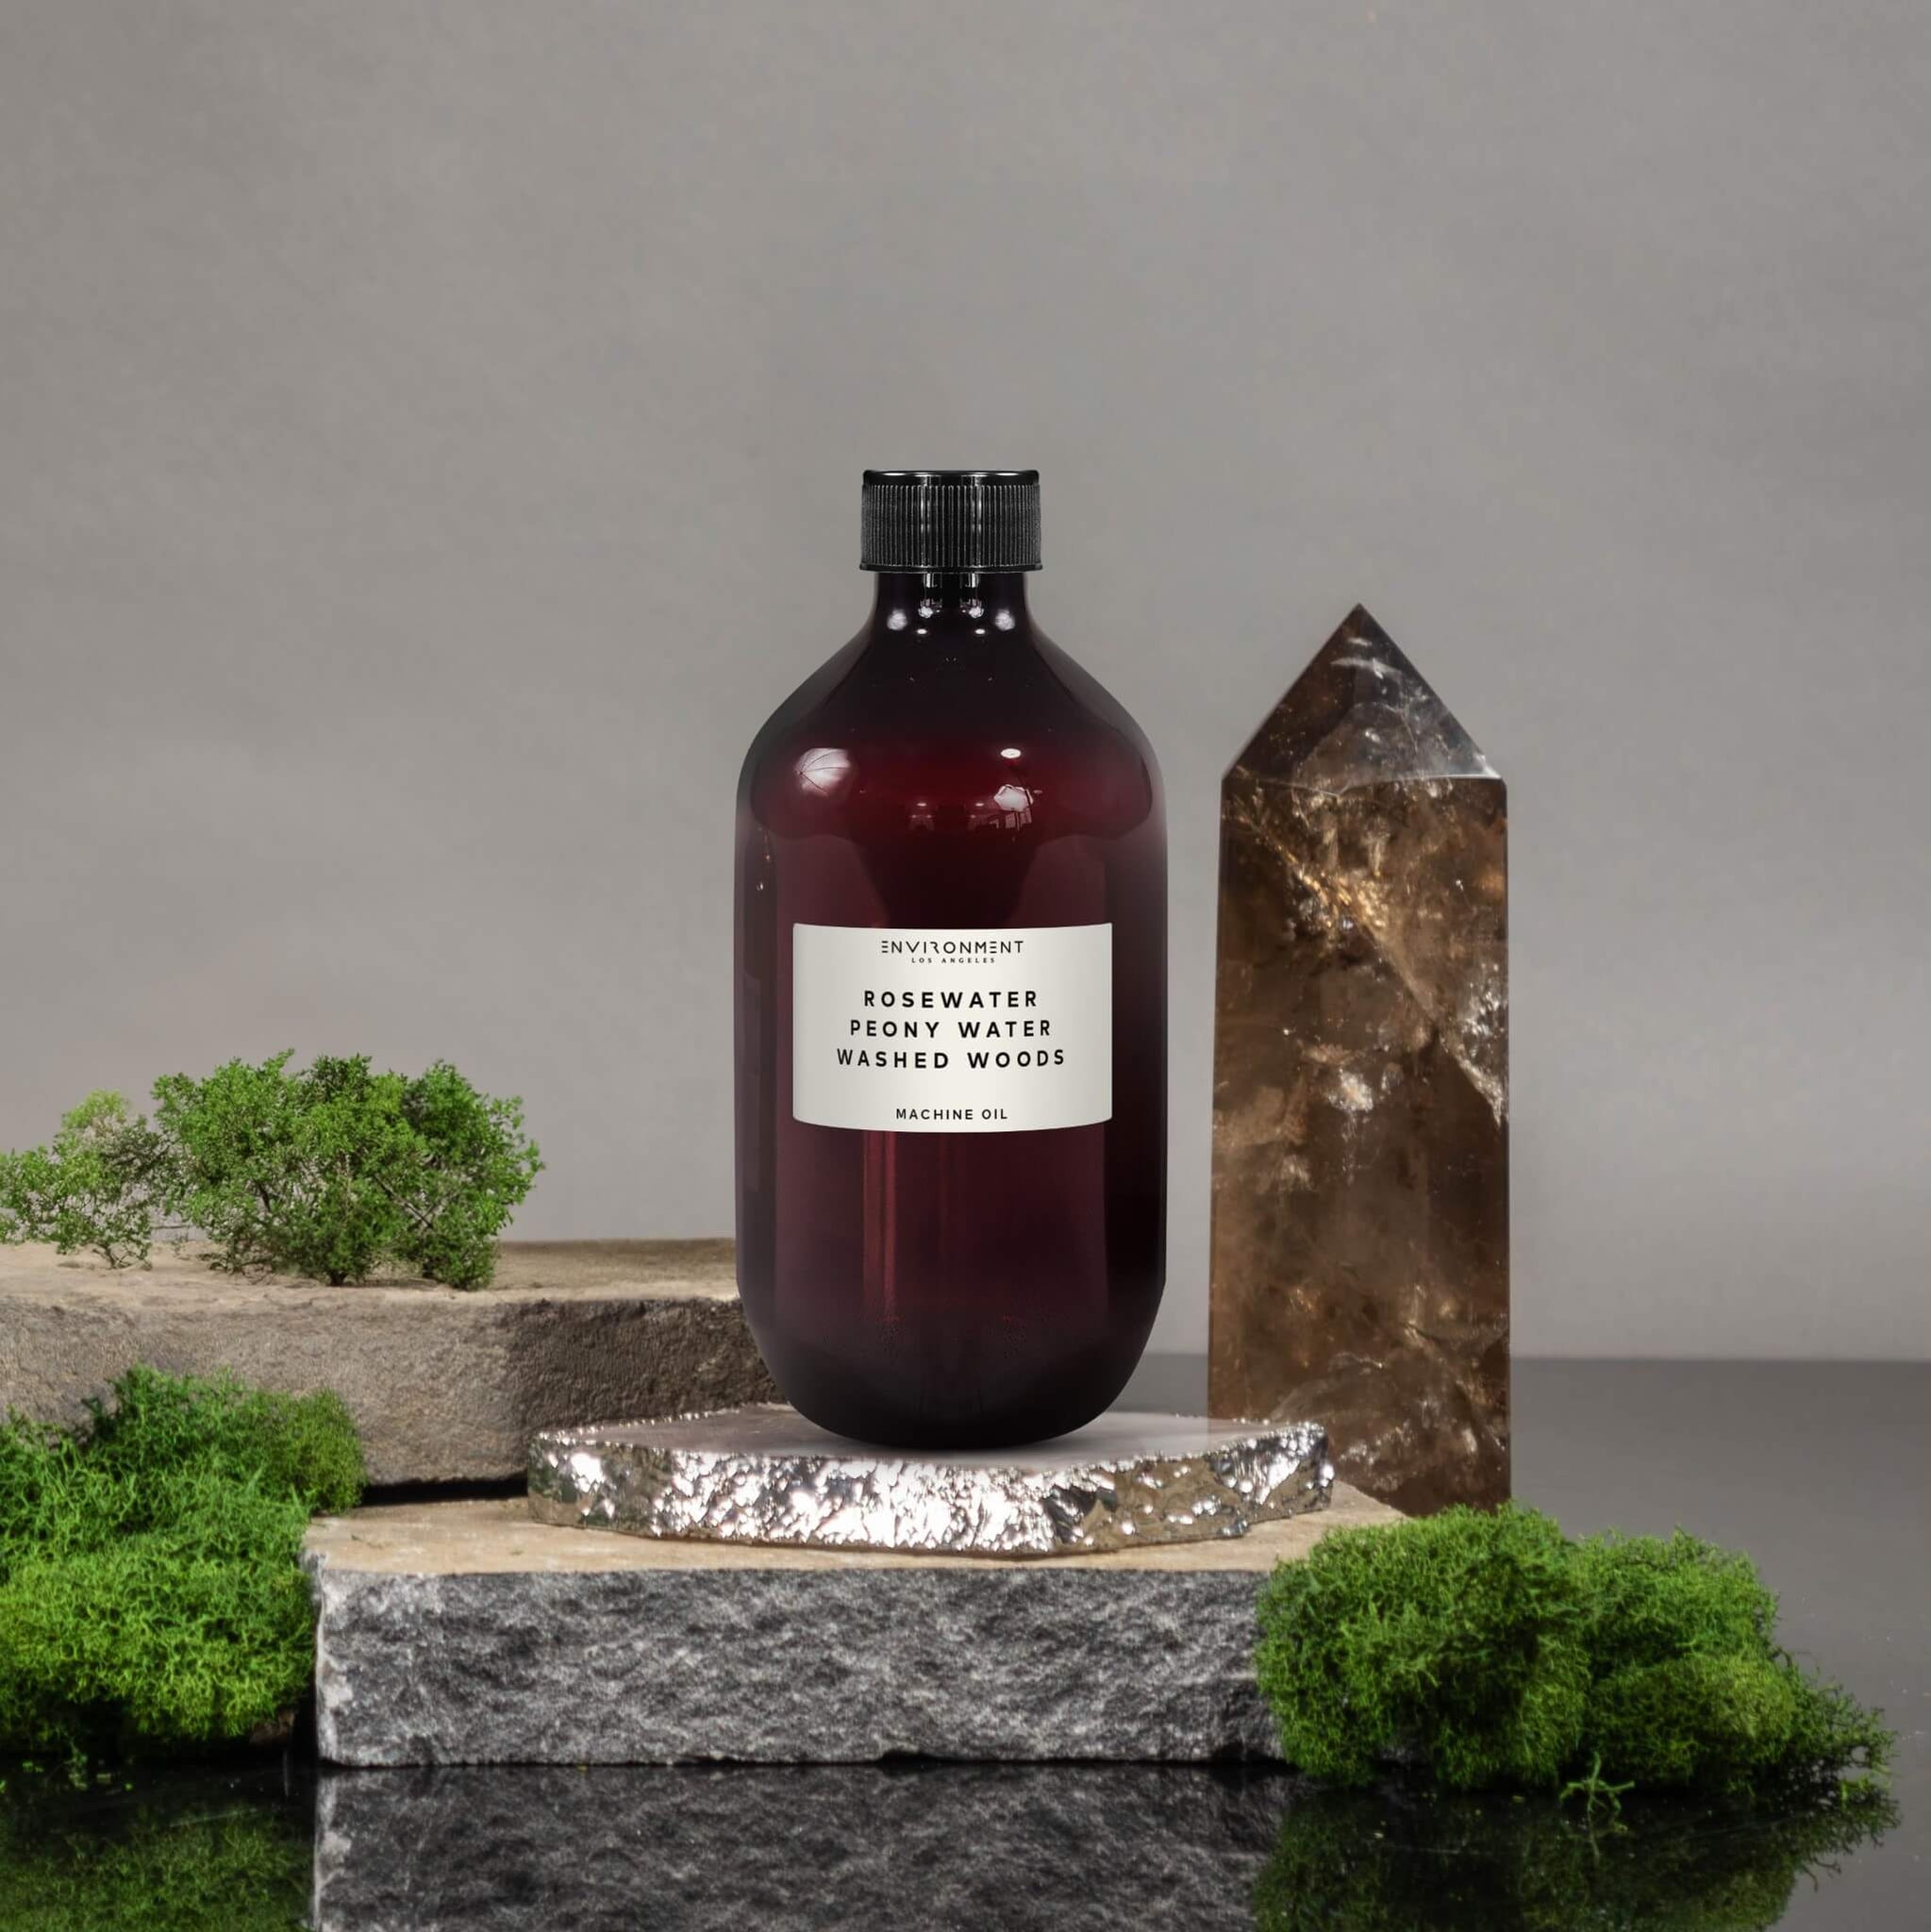 16oz Rosewater | Peony Water | Washed Woods Machine Diffusing Oil (Inspired by Issey Miyake L'Eau d'Issey®)